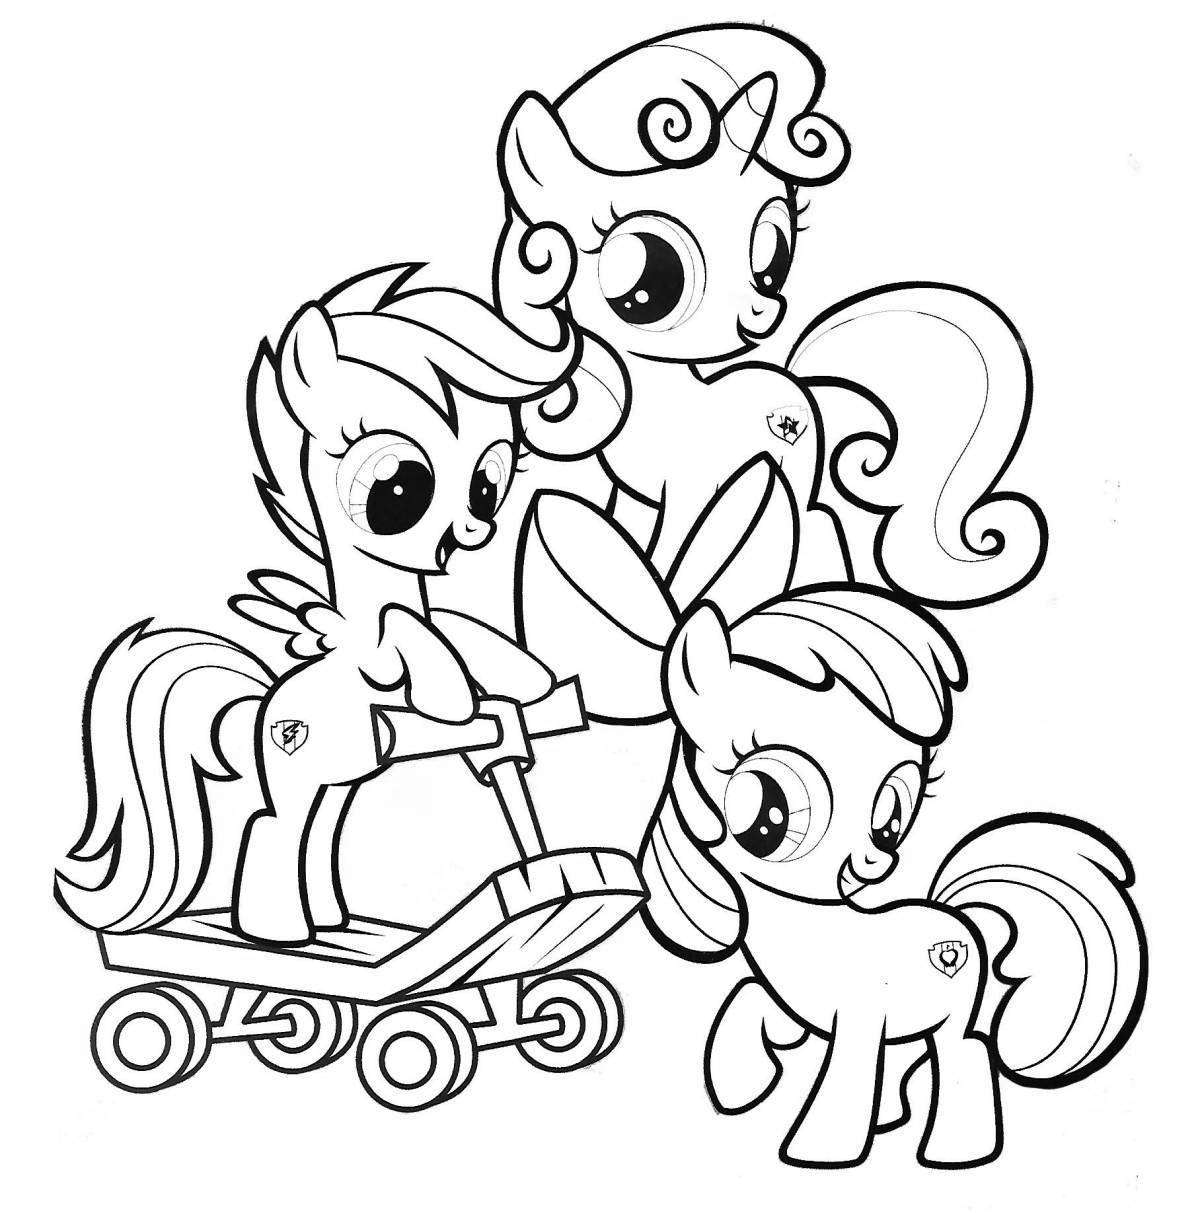 For pony children 6 7 years old #3